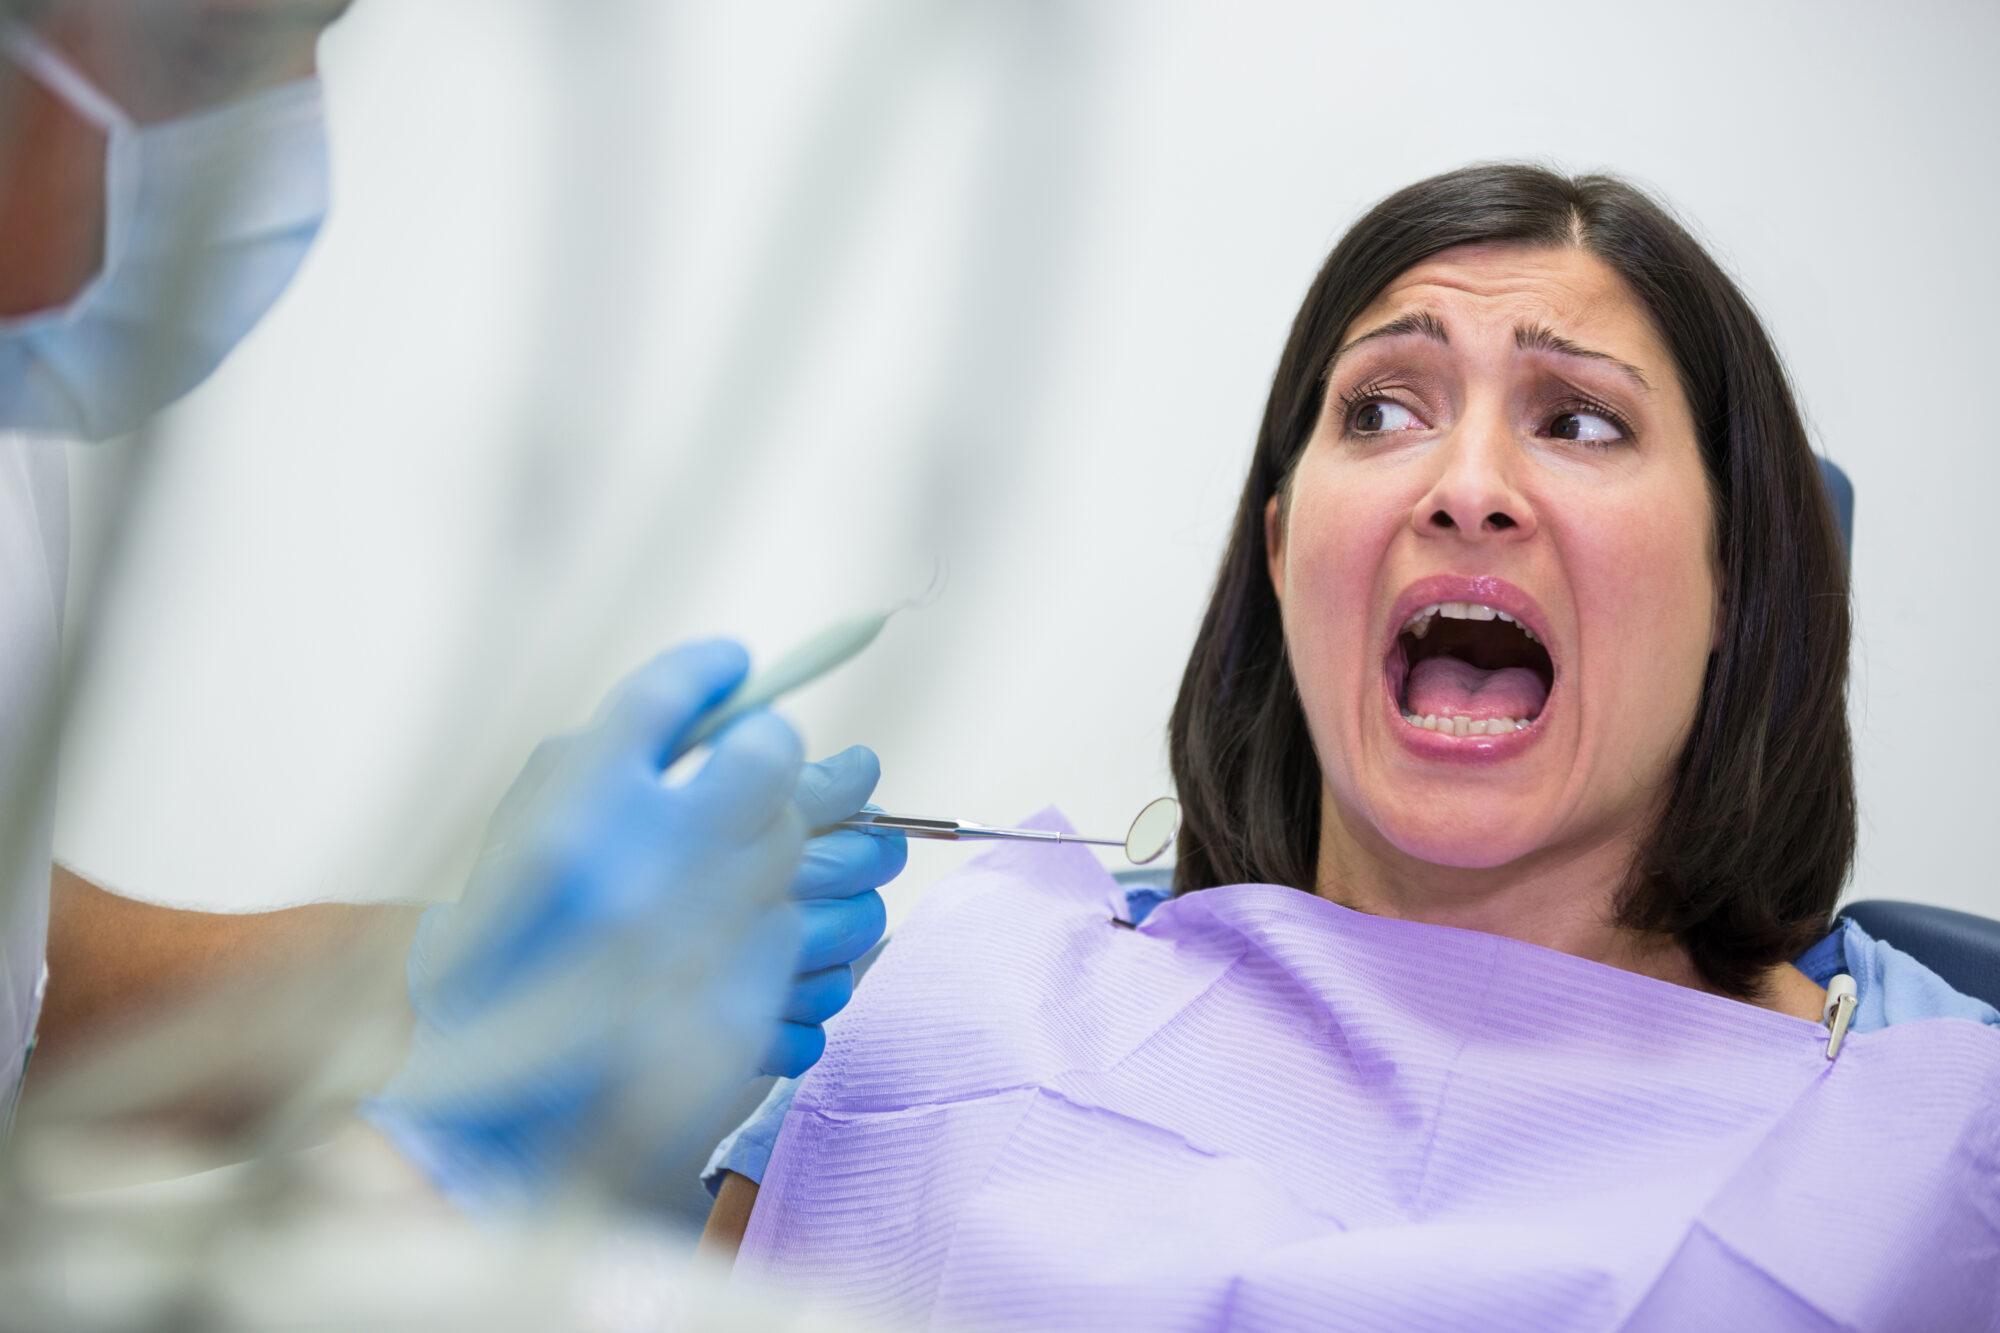 Dental Anxiety And Fear